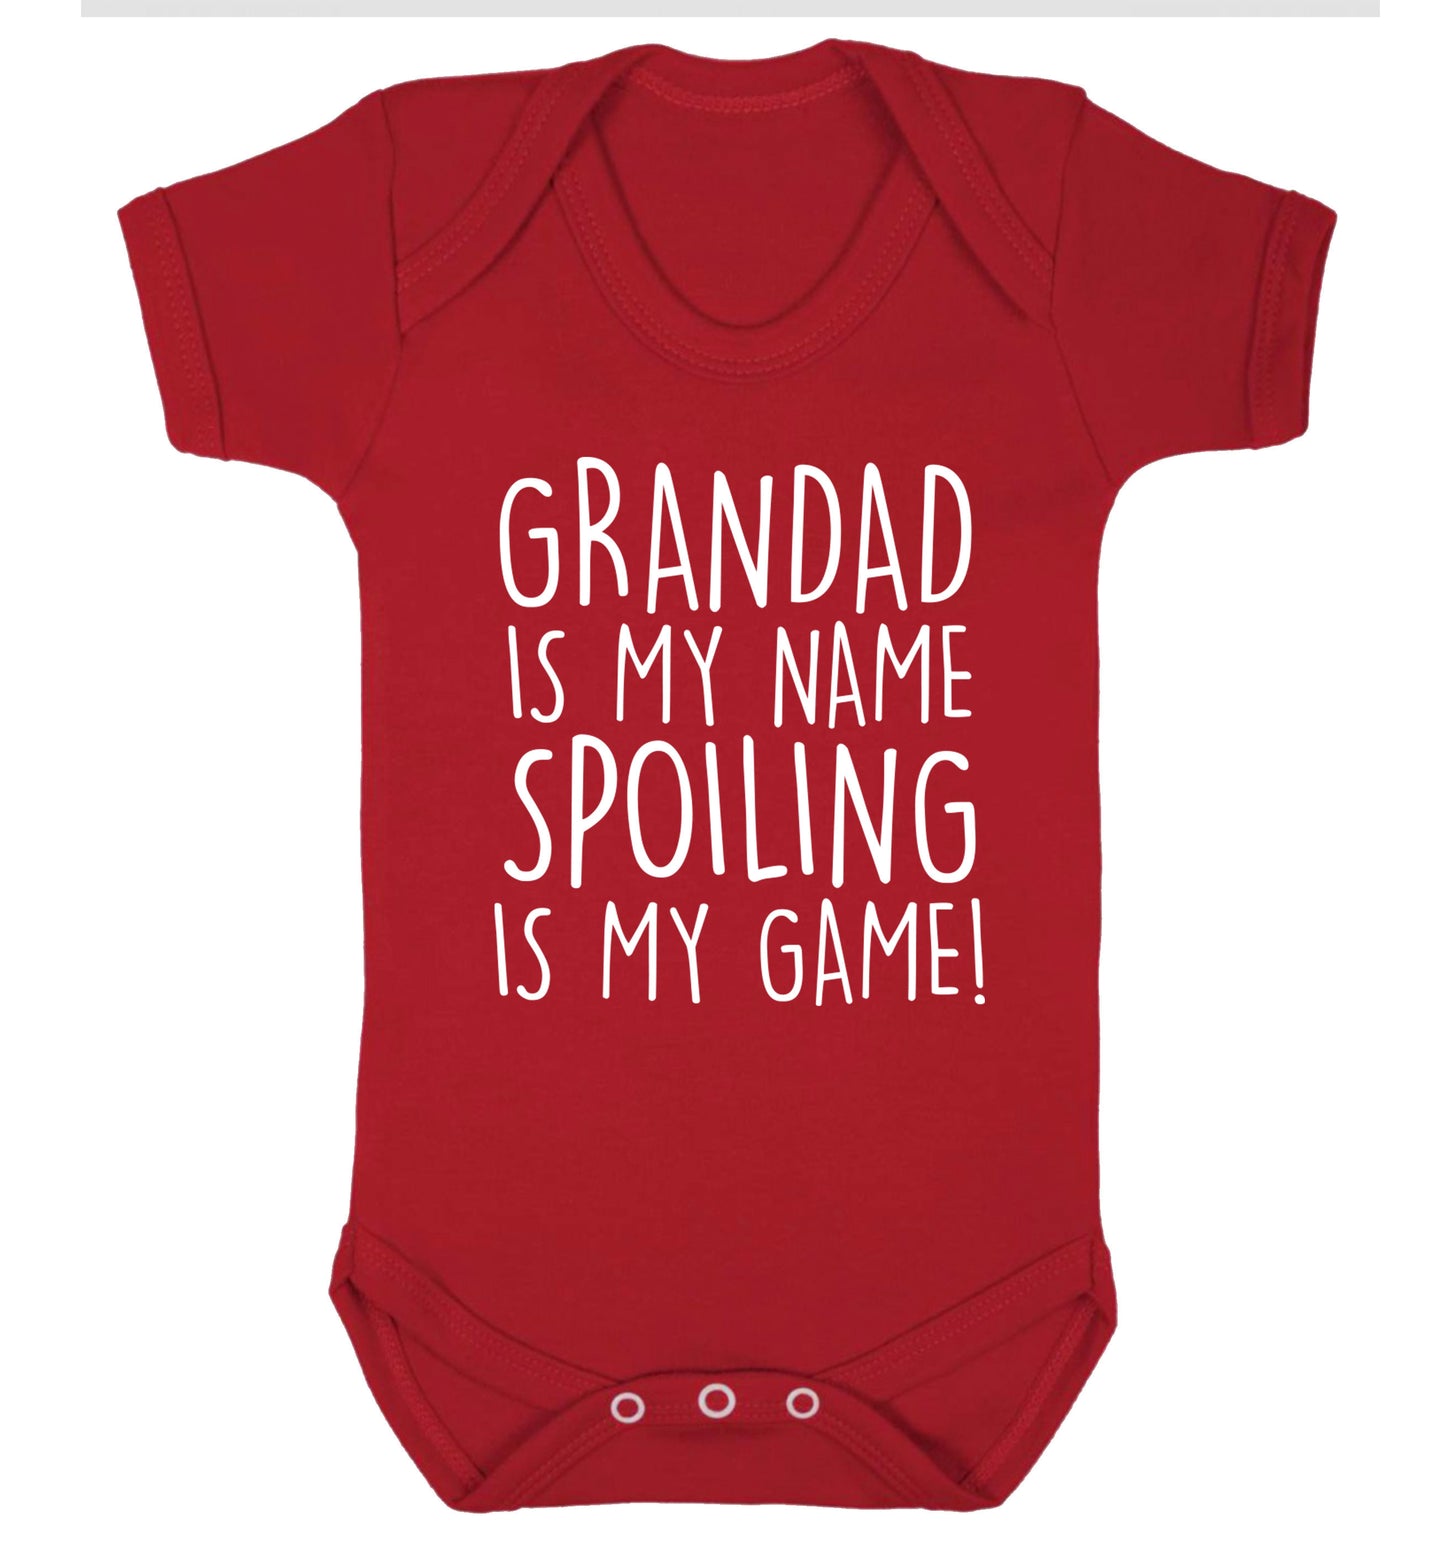 Grandad is my name, spoiling is my game Baby Vest red 18-24 months